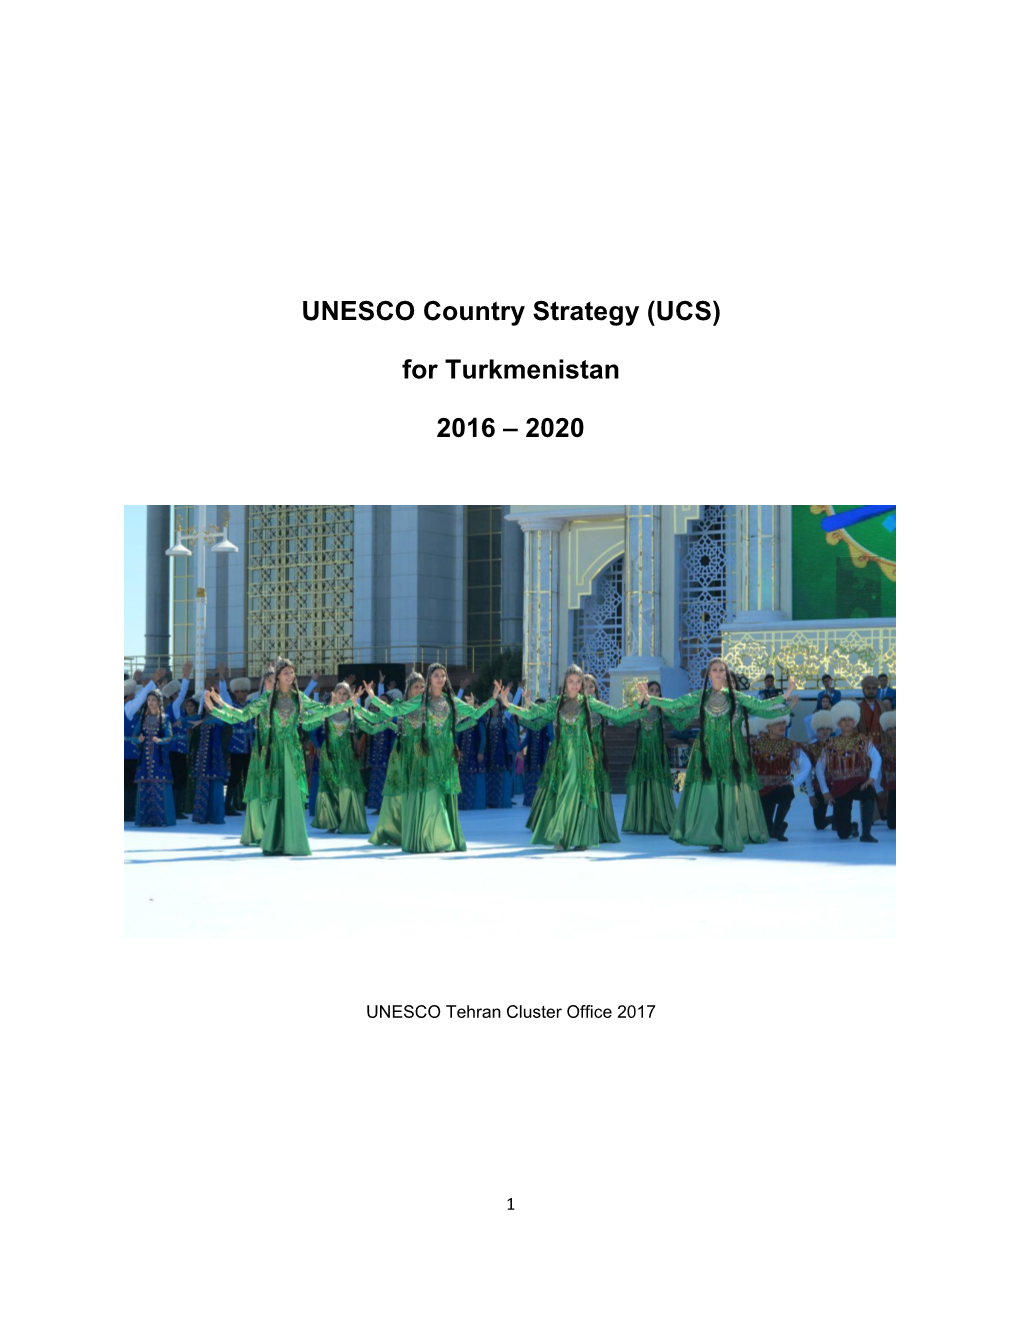 UNESCO Country Strategy (UCS) for Turkmenistan 2016 – 2020